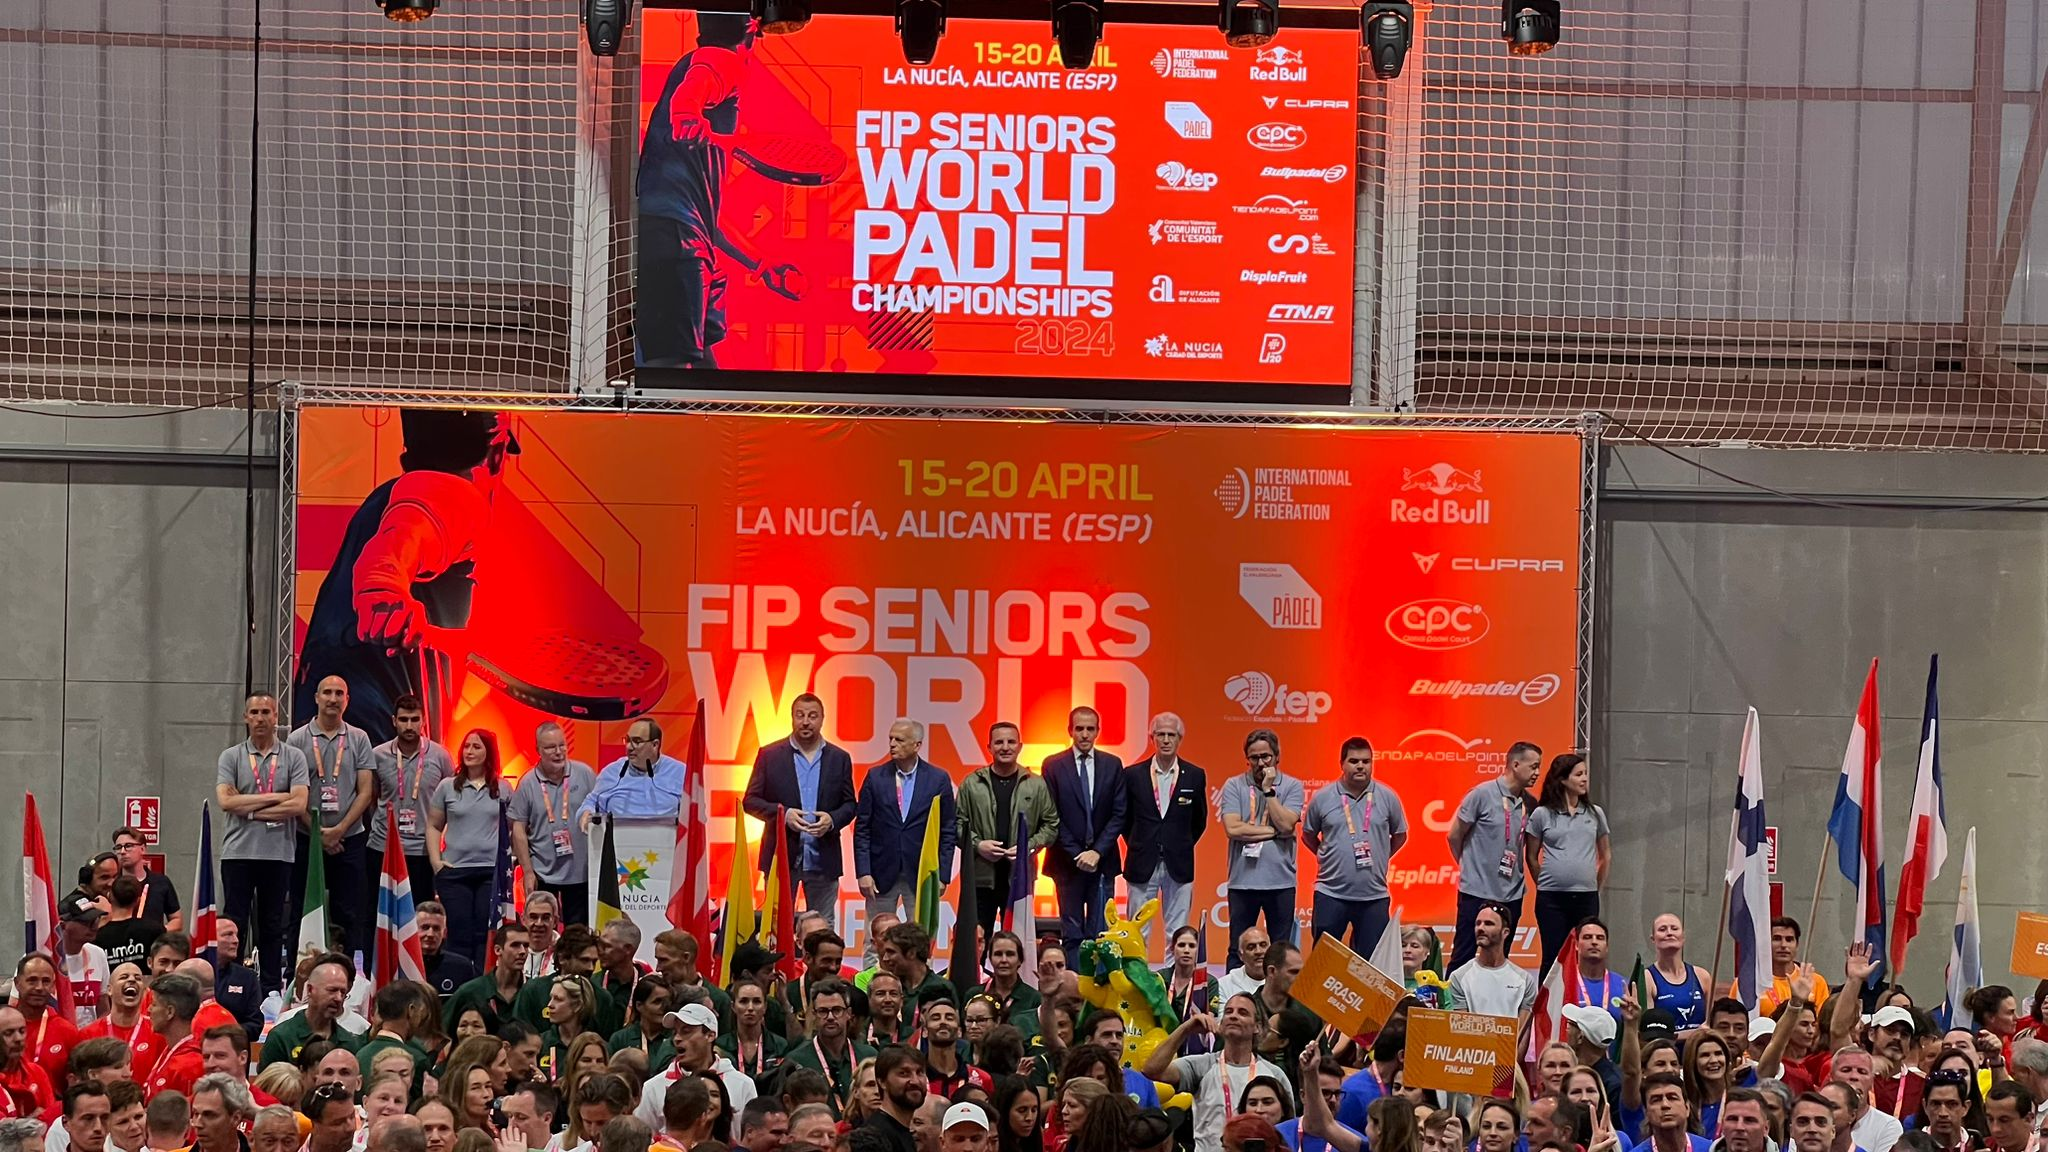 600 players at the 3rd edition of the Senior Worlds Plus